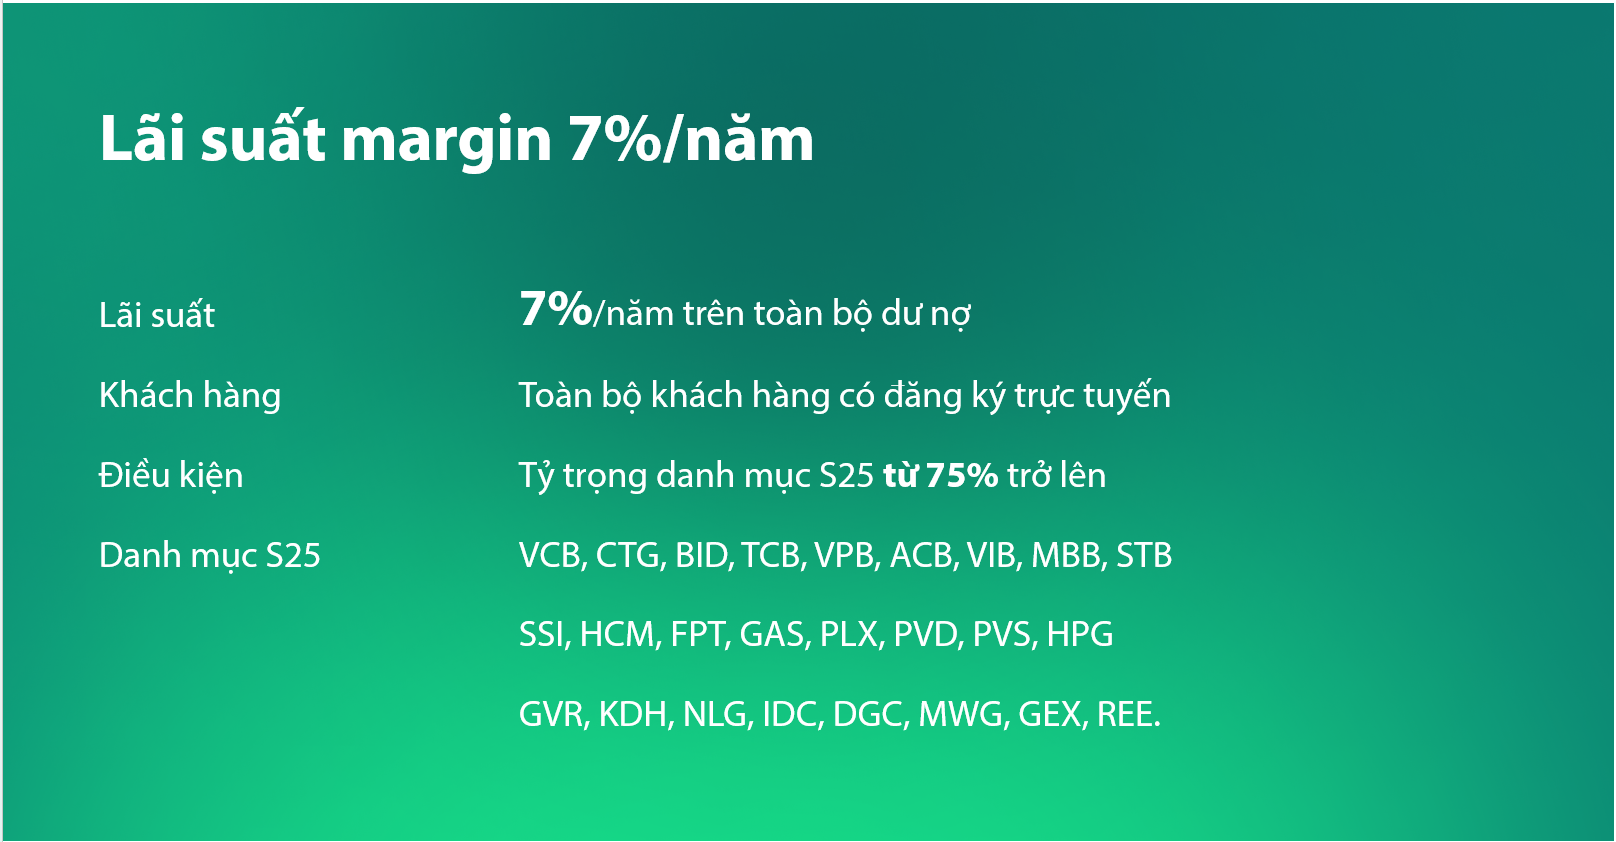 A green and white background with white text  Description automatically generated